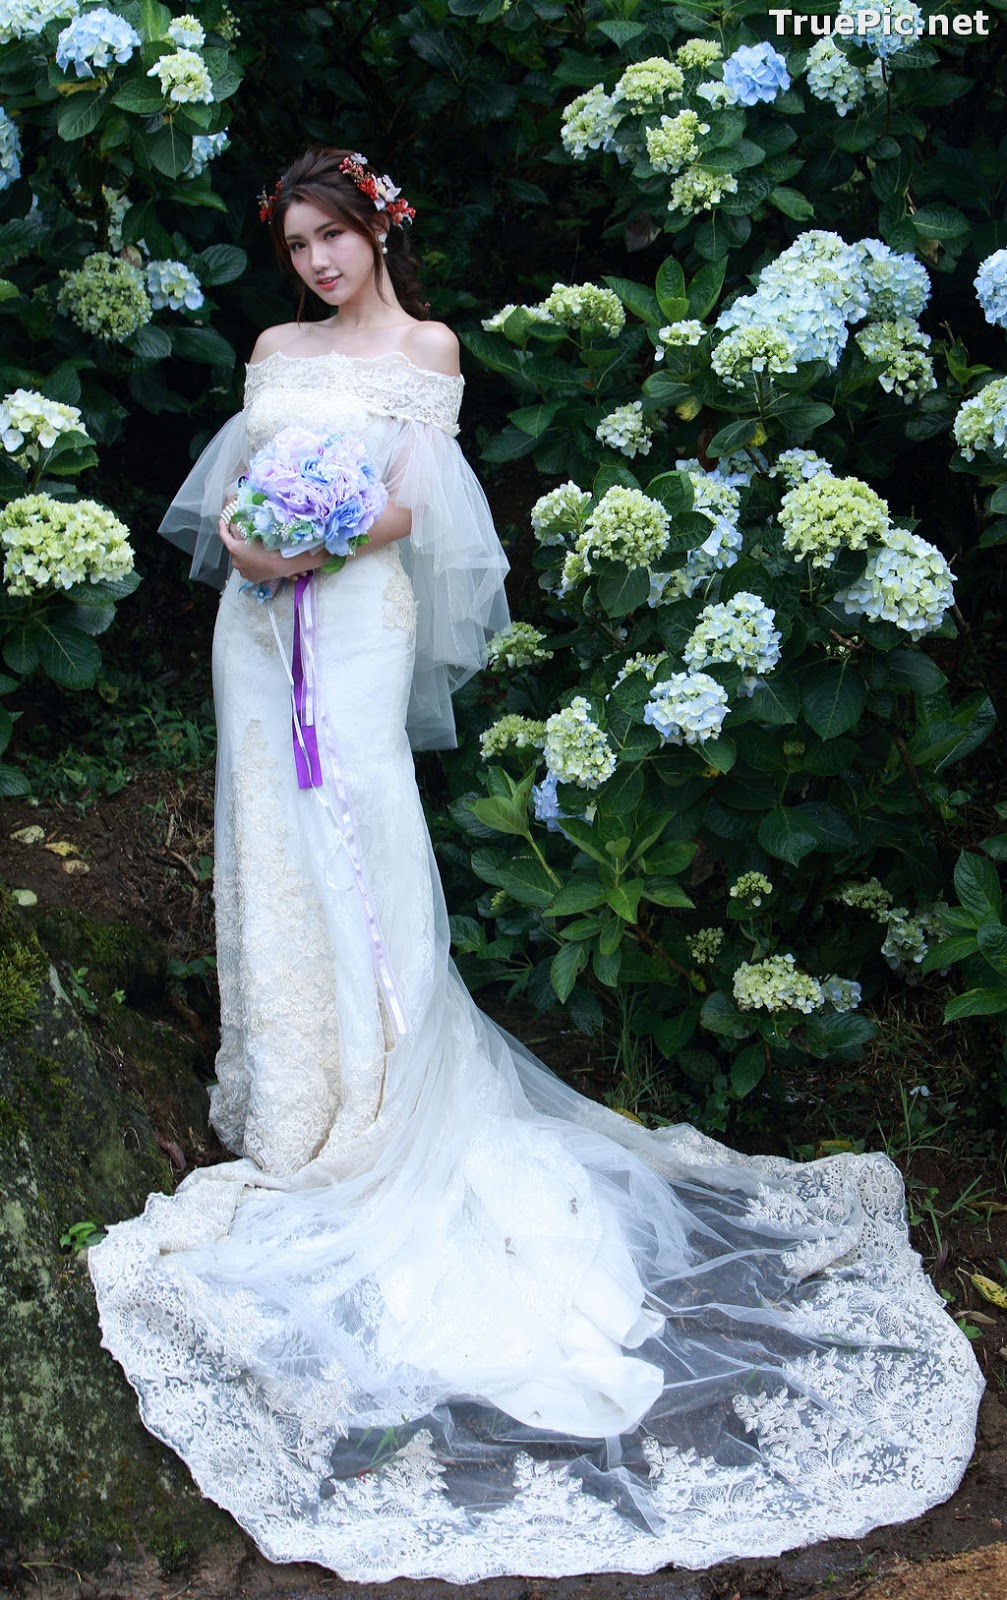 Image Taiwanese Model - 張倫甄 - Beautiful Bride and Hydrangea Flowers - TruePic.net - Picture-17